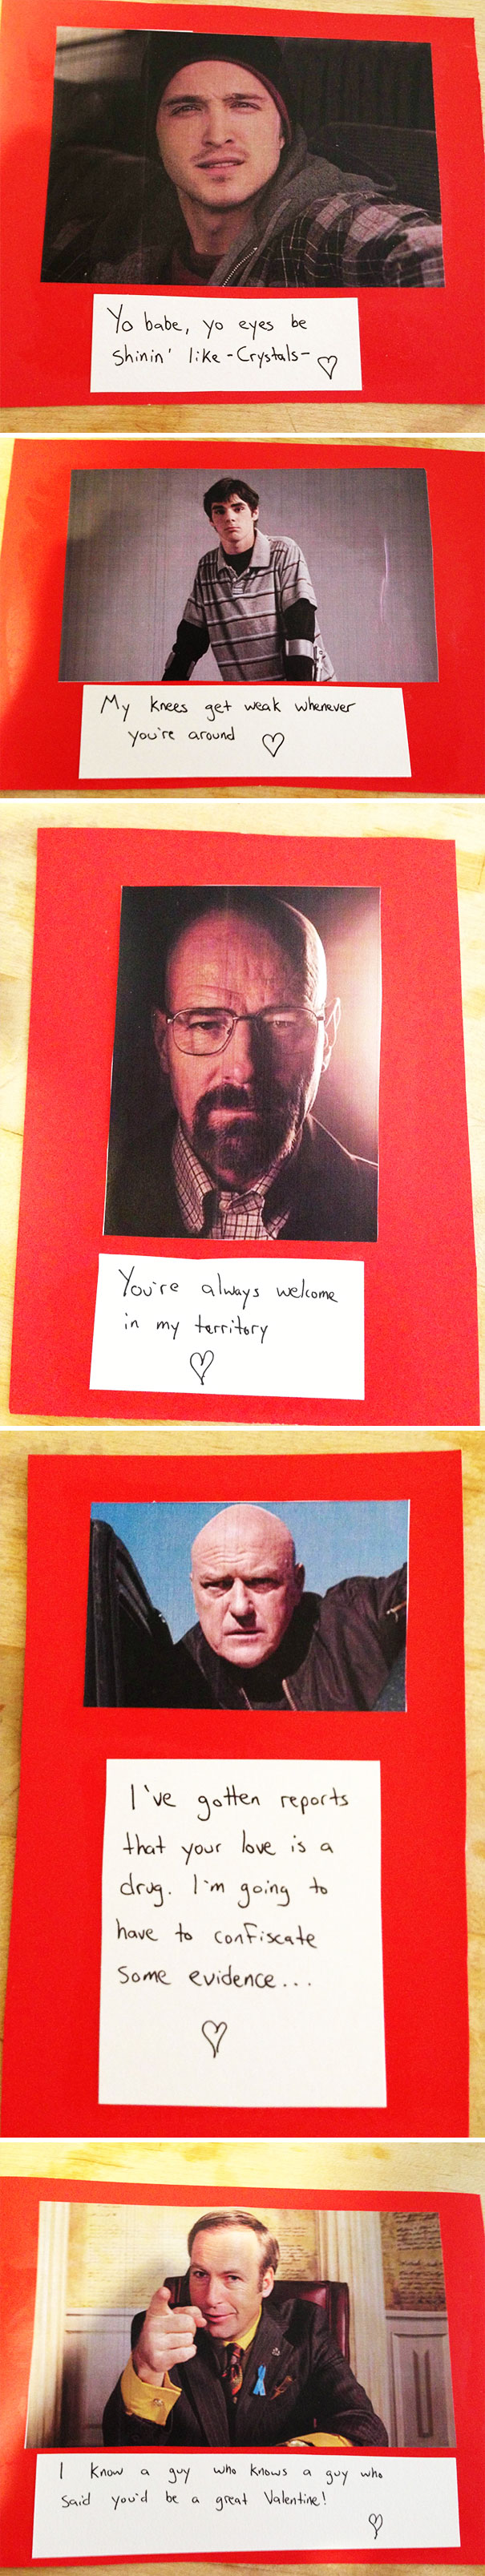 My Roommate Made Breaking Bad Valentine's Cards